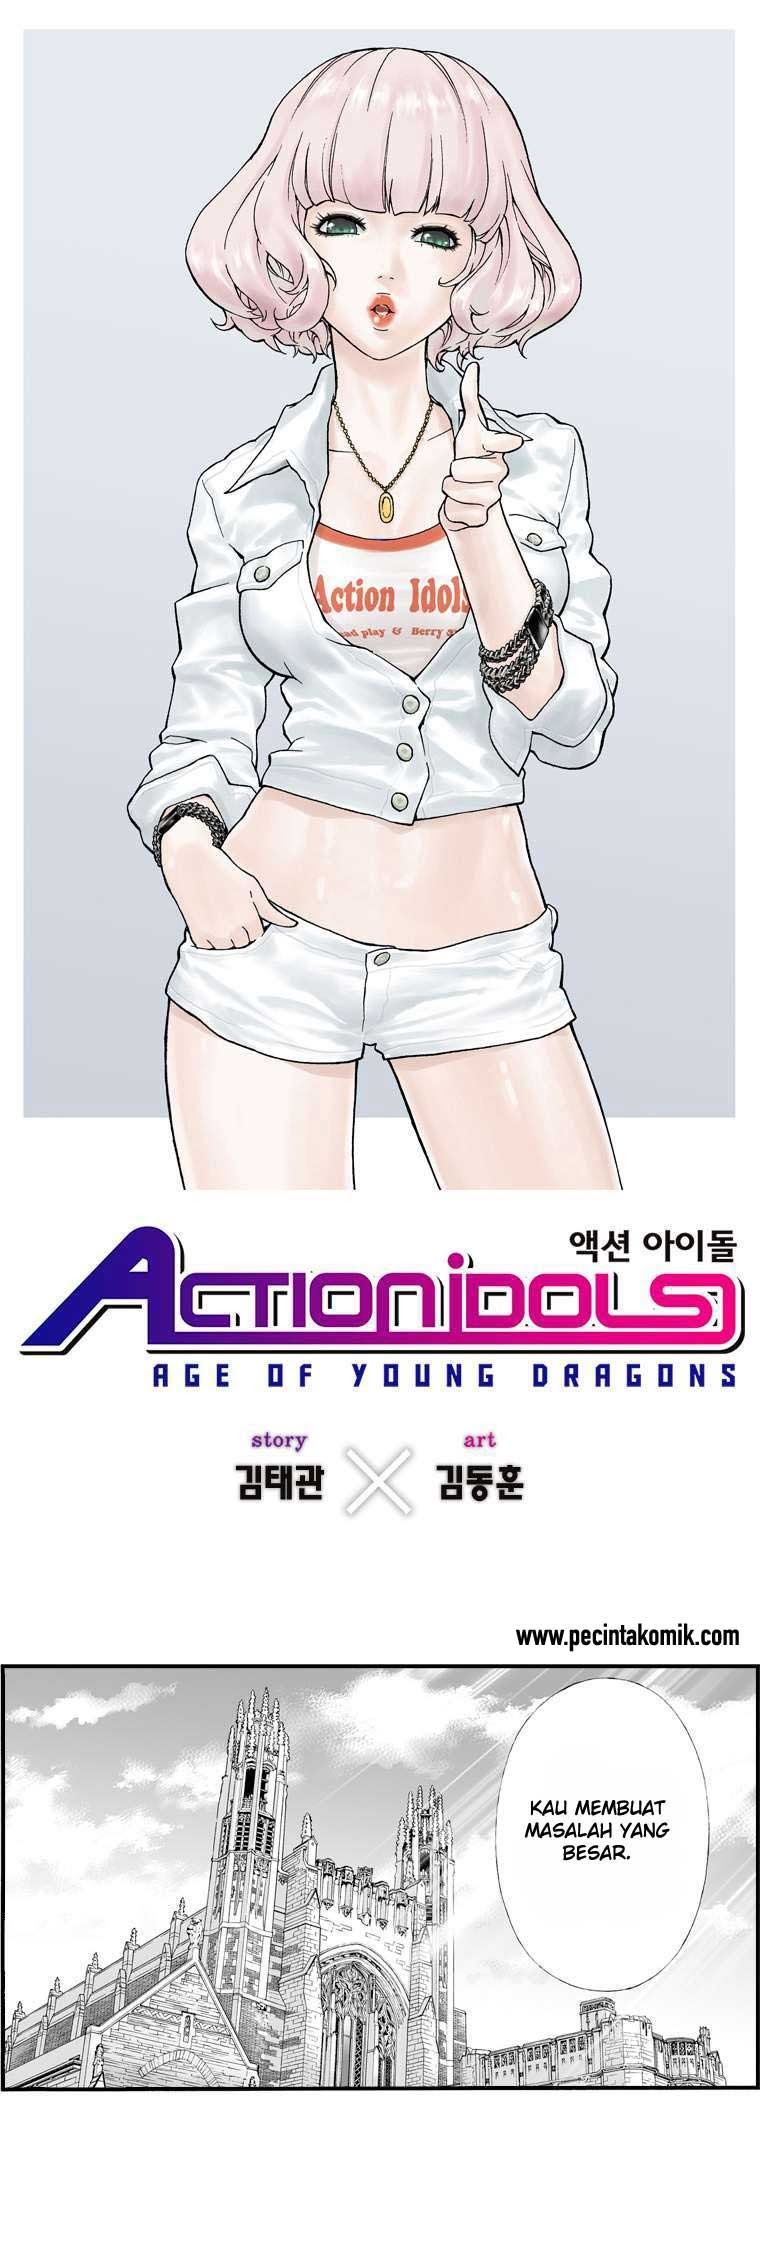 Action Idols – Age of Young Dragons Chapter 5